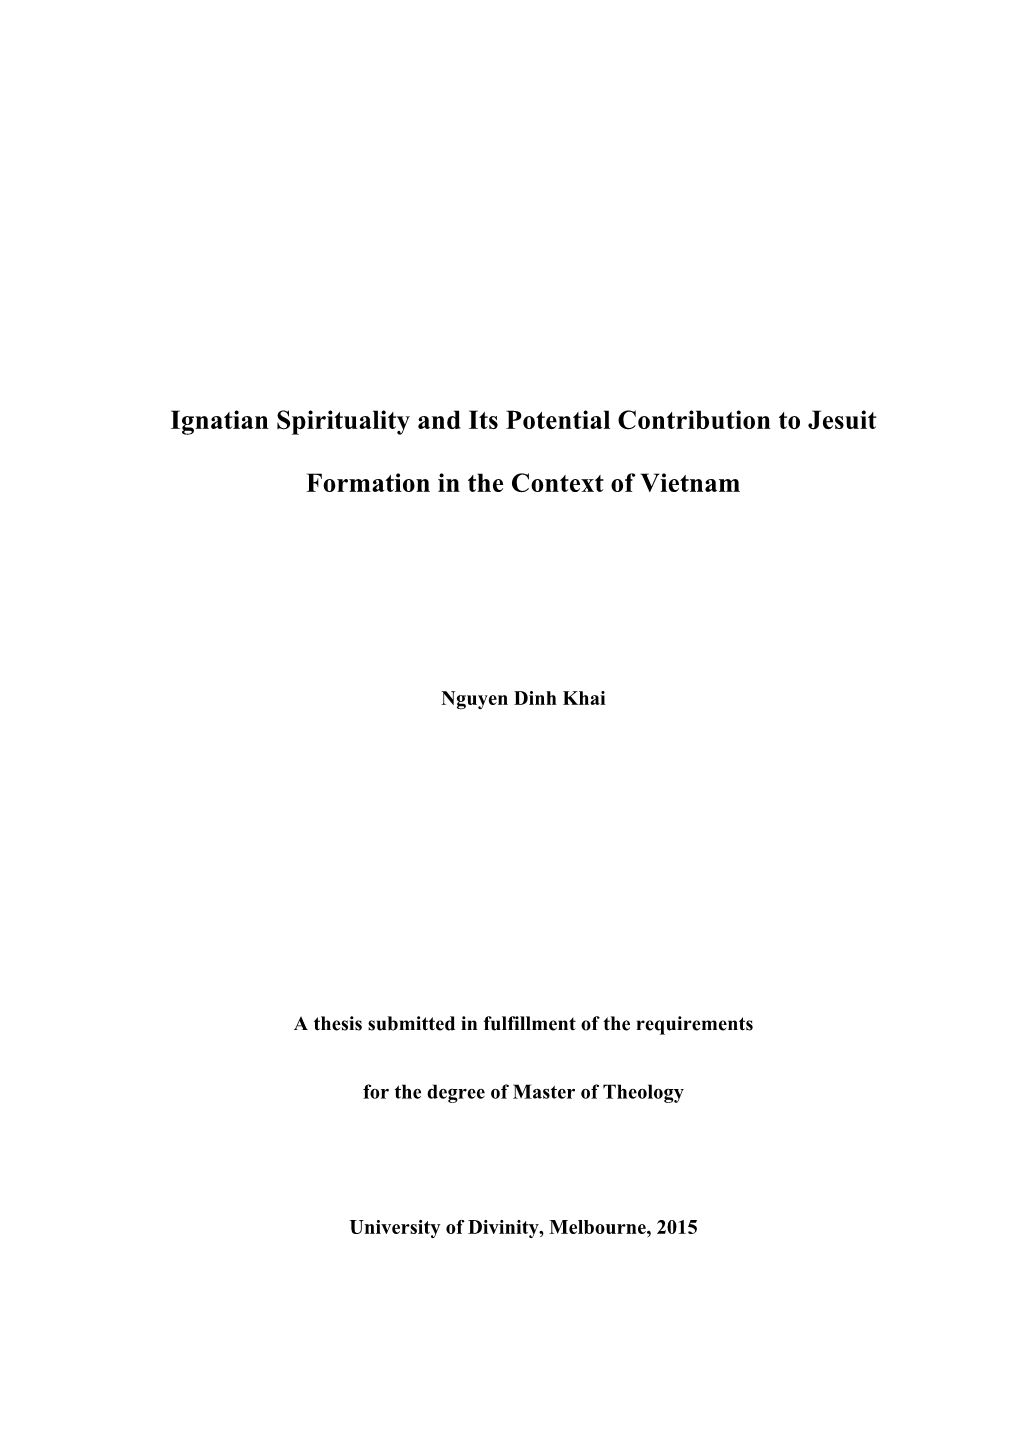 Ignatian Spirituality and Its Potential Contribution to Jesuit Formation in the Context of Vietnam